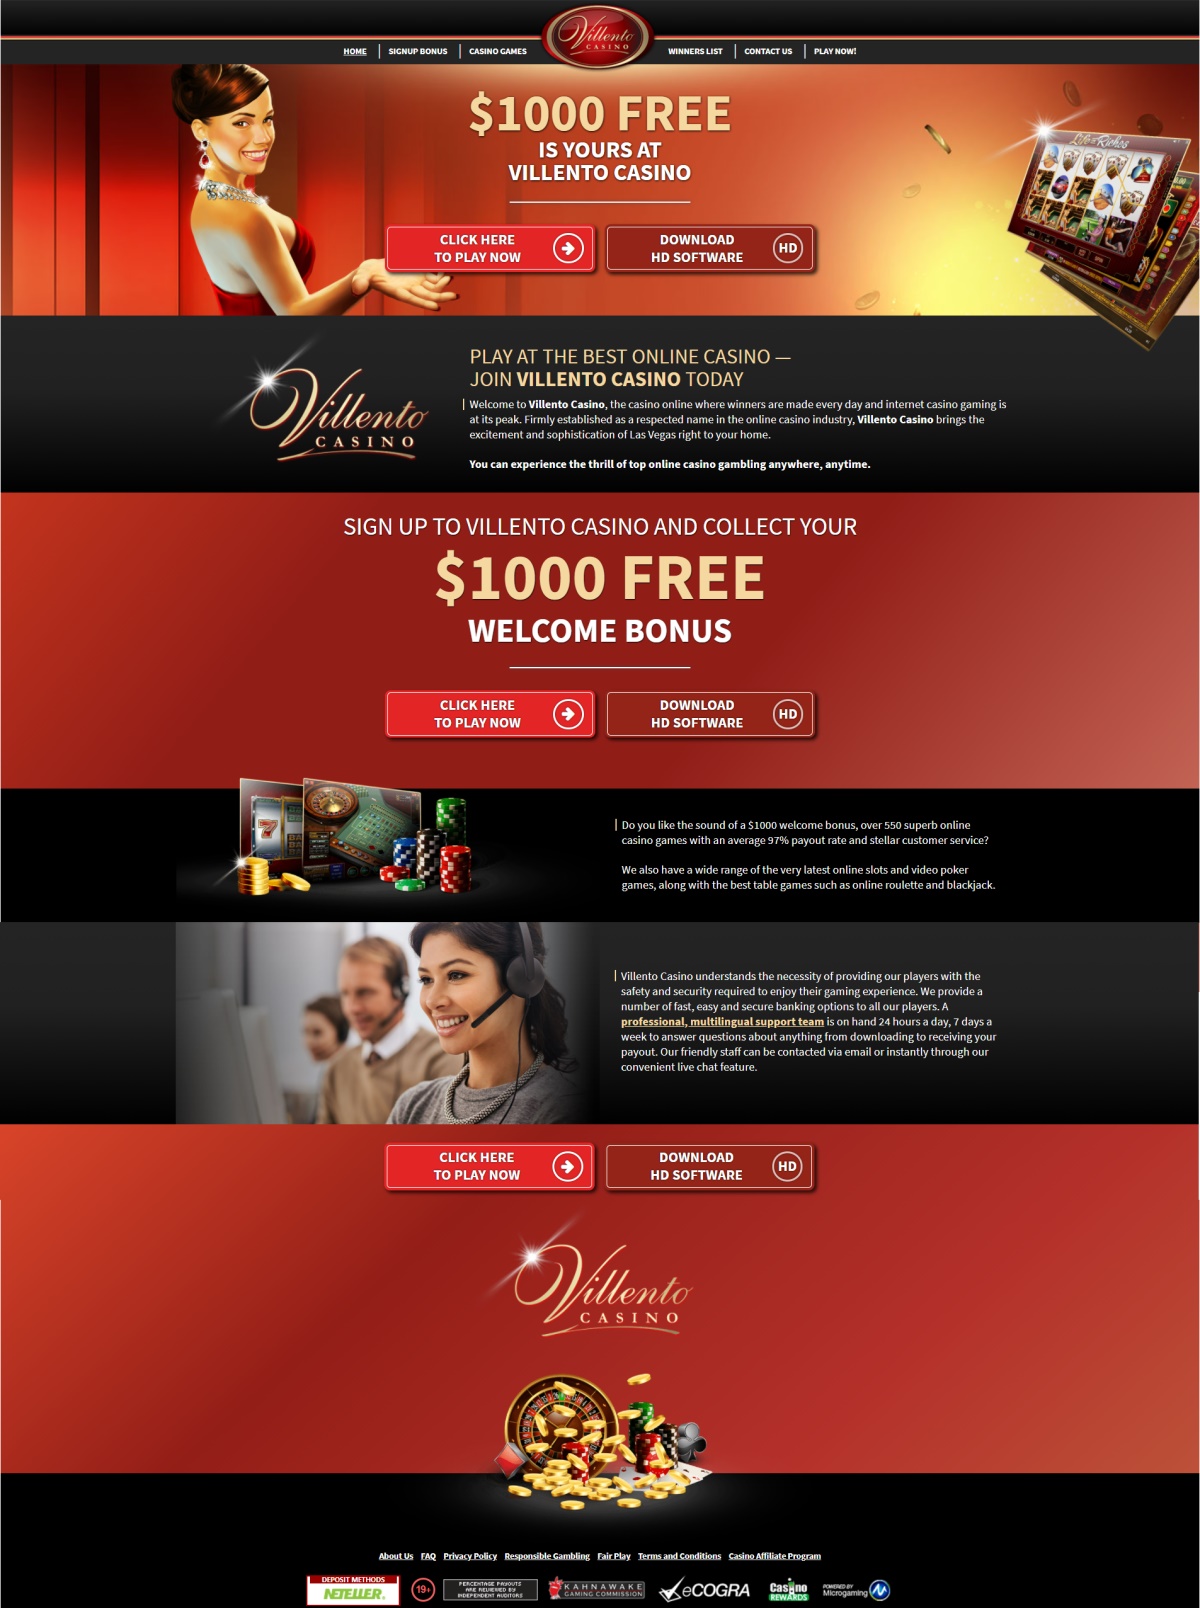 Welcome to Villento Casino, the casino online where winners are made every day and internet casino gaming is at its peak. Firmly established as a respected name in the online casino industry, Villento Casino brings the excitement and sophistication of Las Vegas right to your home. You can experience the thrill of top online casino gambling anywhere, anytime. Do you like the sound of a welcome bonus, over 550 superb online casino games with an average 97% payout rate and stellar customer service? We also have a wide range of the very latest online slots and video poker games, along with the best table games such as online roulette and blackjack, you really are spoilt for choice! Villento Casino have games for everyone, whether you are new to online gaming or a seasoned player. Players are rewarded on a regular basis with high payouts and lucrative bonuses. You can take advantage of the phenomenal jackpot prizes immediately by signing up now and trying your luck at your favourite game. Villento Casino understands the necessity of providing their players with the safety and security required to enjoy their gaming experience. Villento Casino provide a number of fast, easy and secure banking options to all their players. A professional, multilingual support team is on hand 24 hours a day, 7 days a week to answer questions about anything from downloading to receiving your payout. Villento Casino friendly staff can be contacted via email or instantly through our convenient live chat feature.